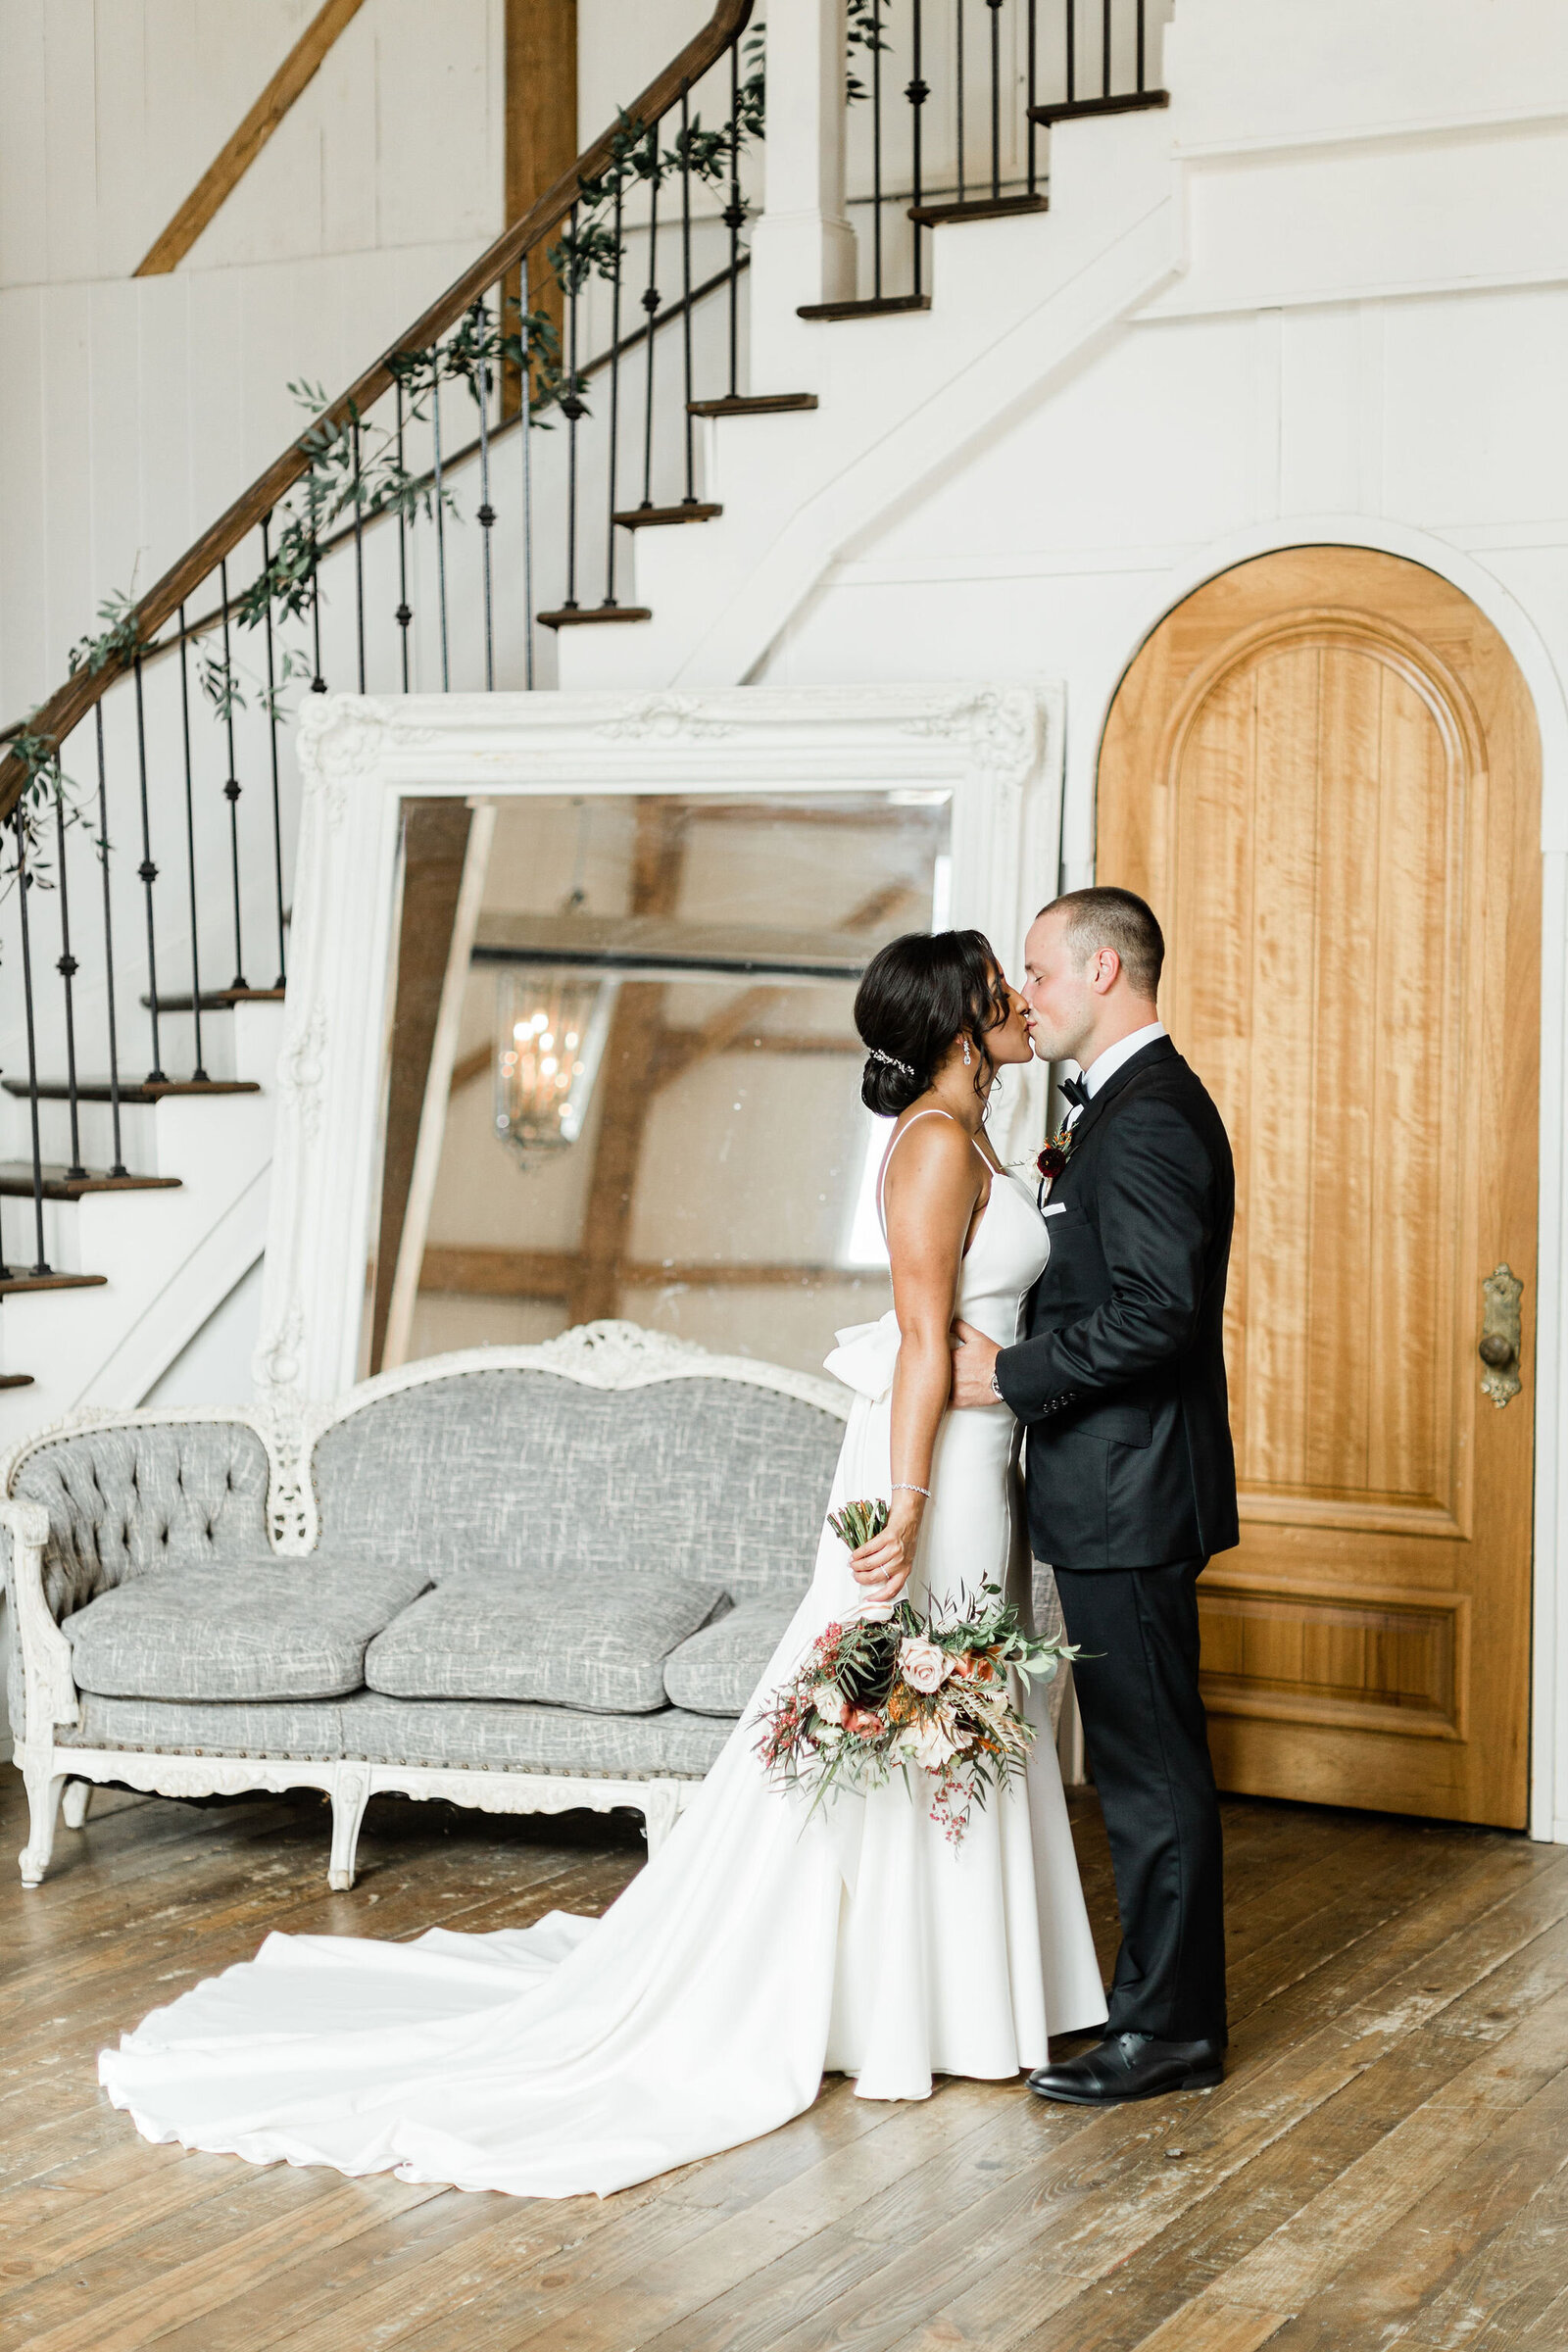 Stunning Wedding Day Couples Photos | Cleveland OH | The Axtells Photo and Film